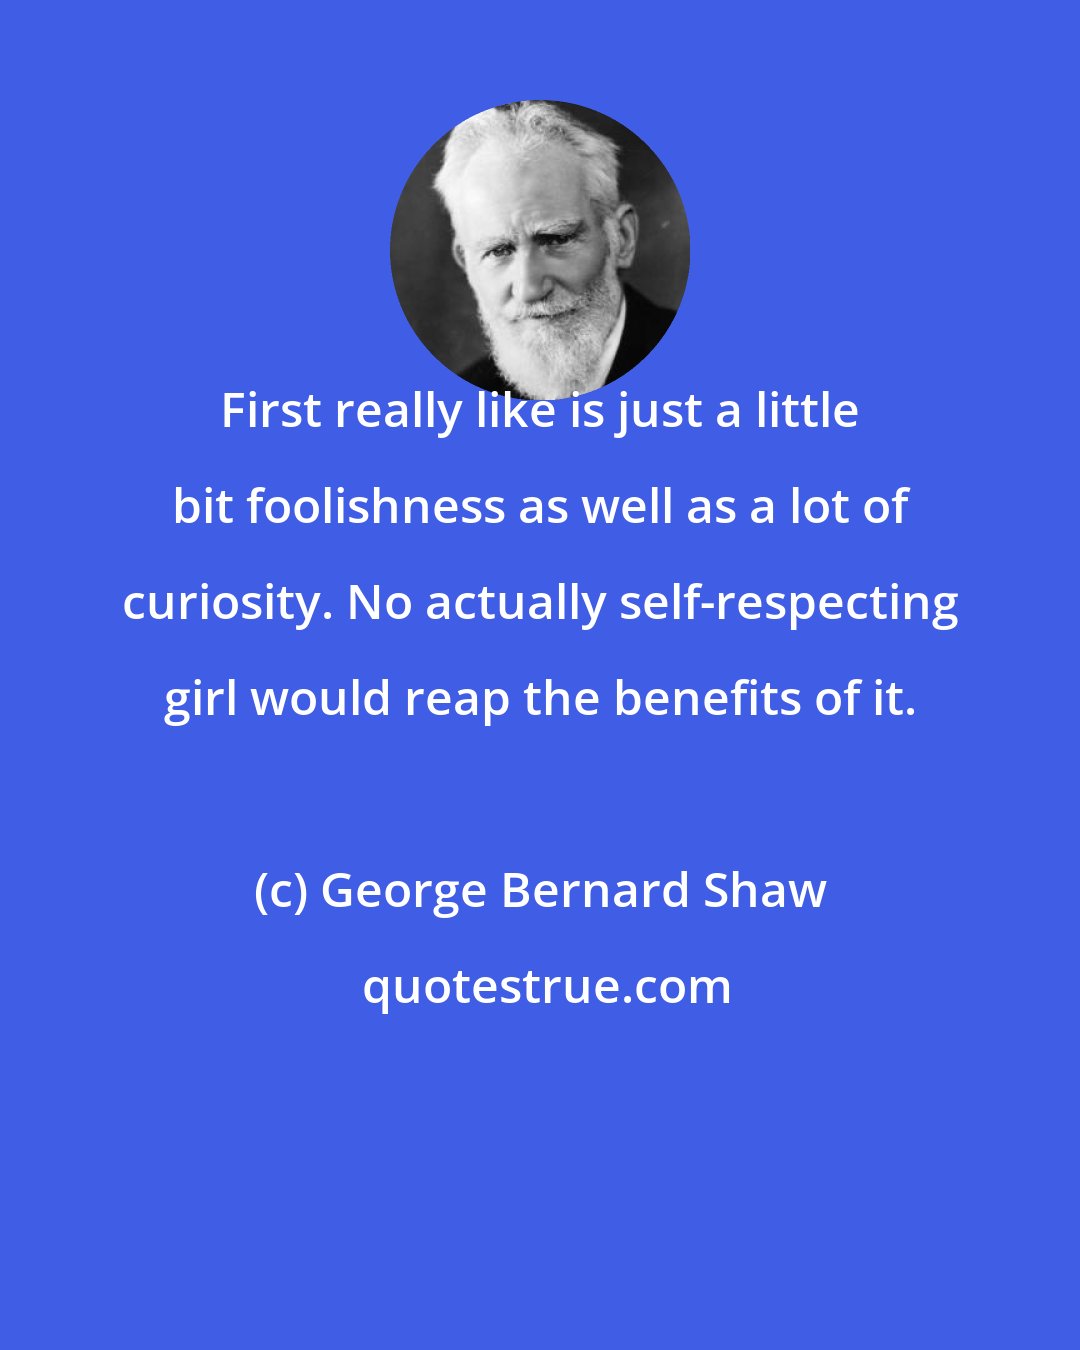 George Bernard Shaw: First really like is just a little bit foolishness as well as a lot of curiosity. No actually self-respecting girl would reap the benefits of it.